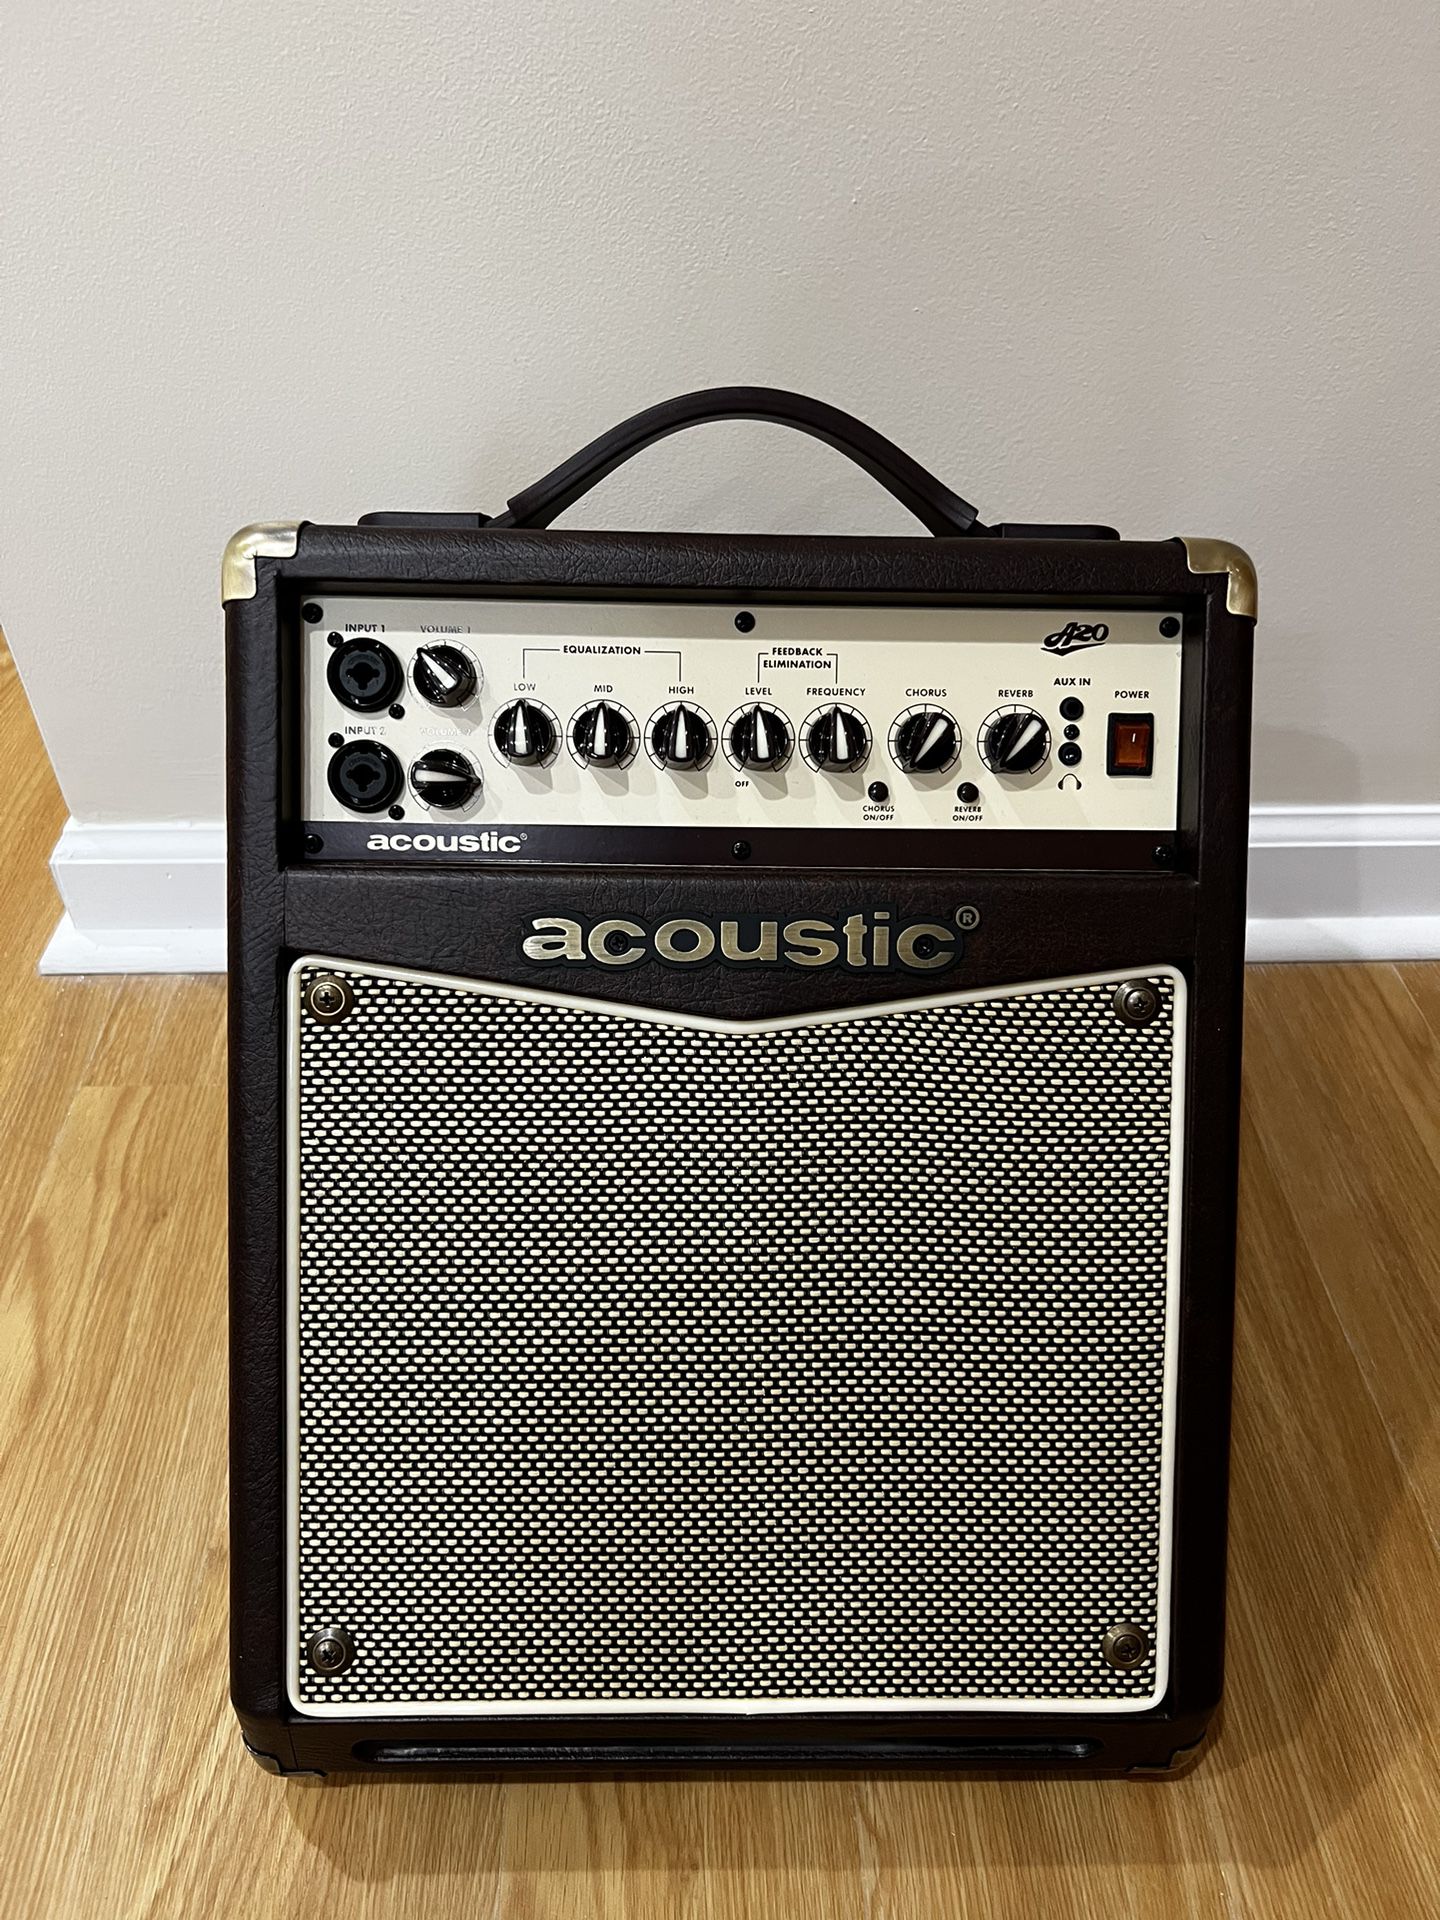 Acoustic A20 Combo amp with multiple inputs